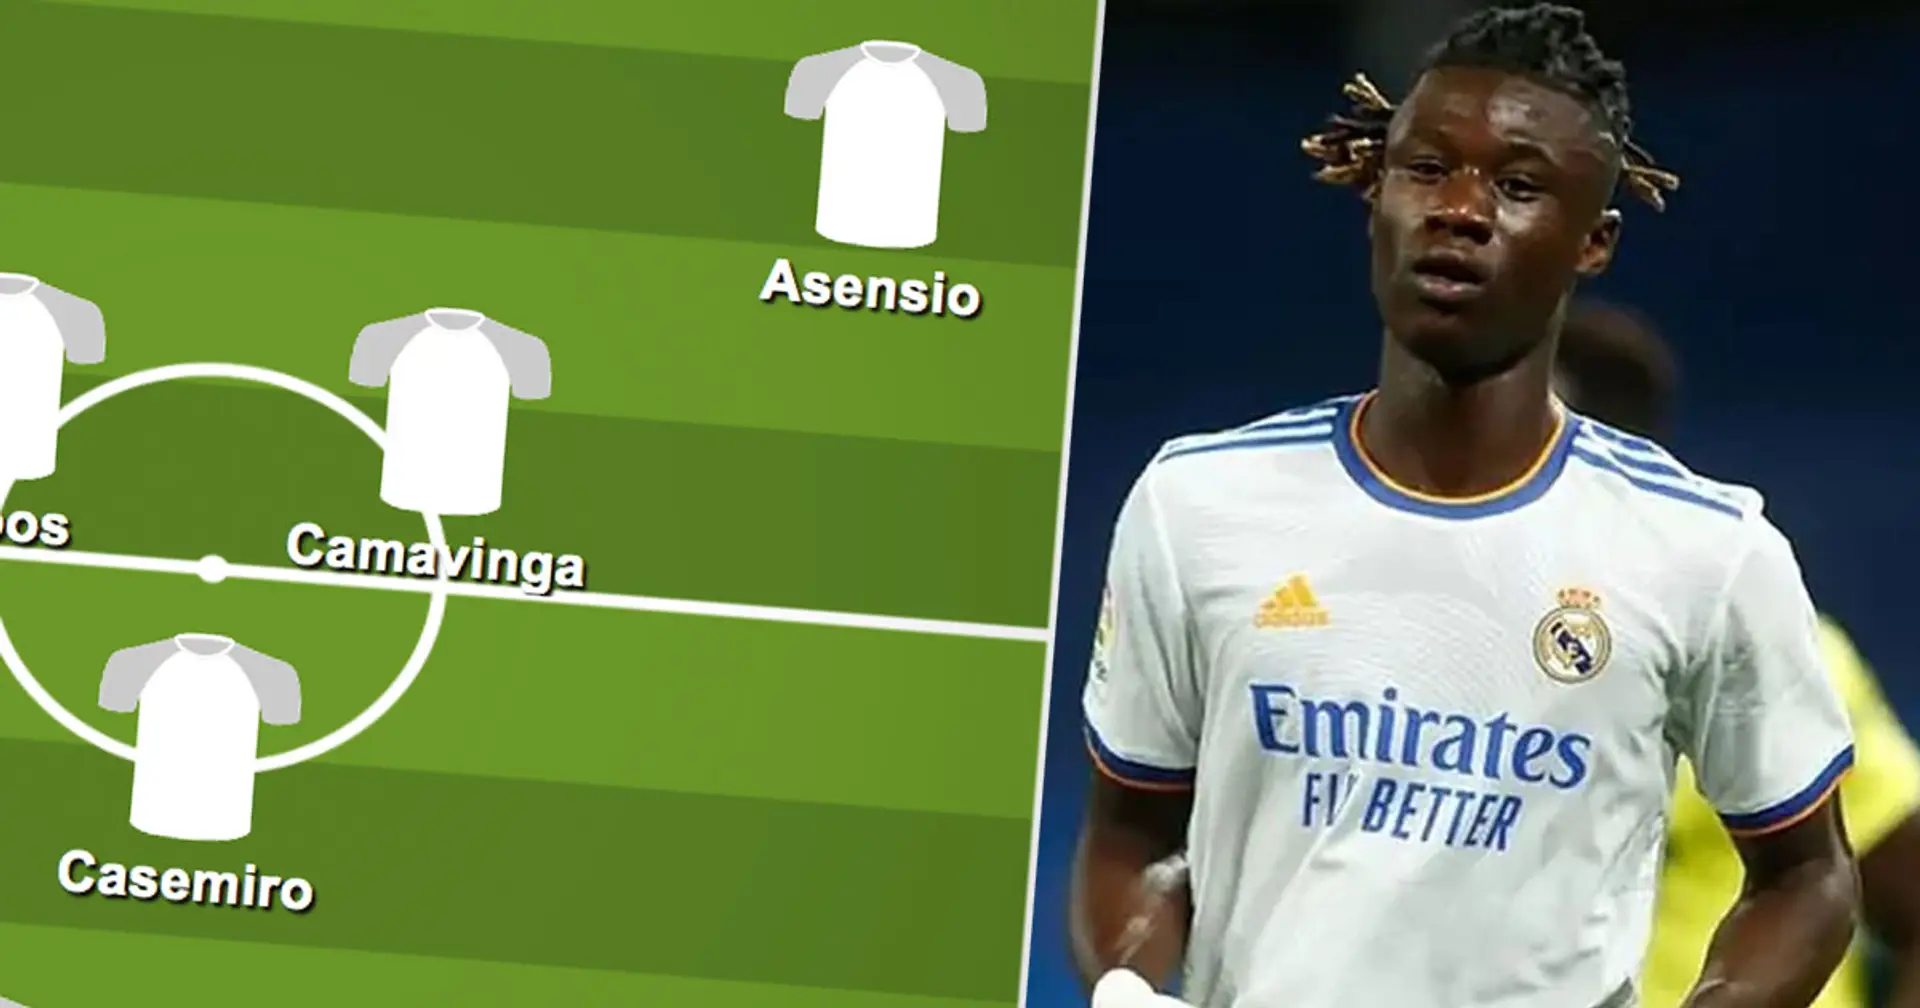 Camavinga in? Select Real Madrid's ultimate XI for Sevilla clash from 2 options